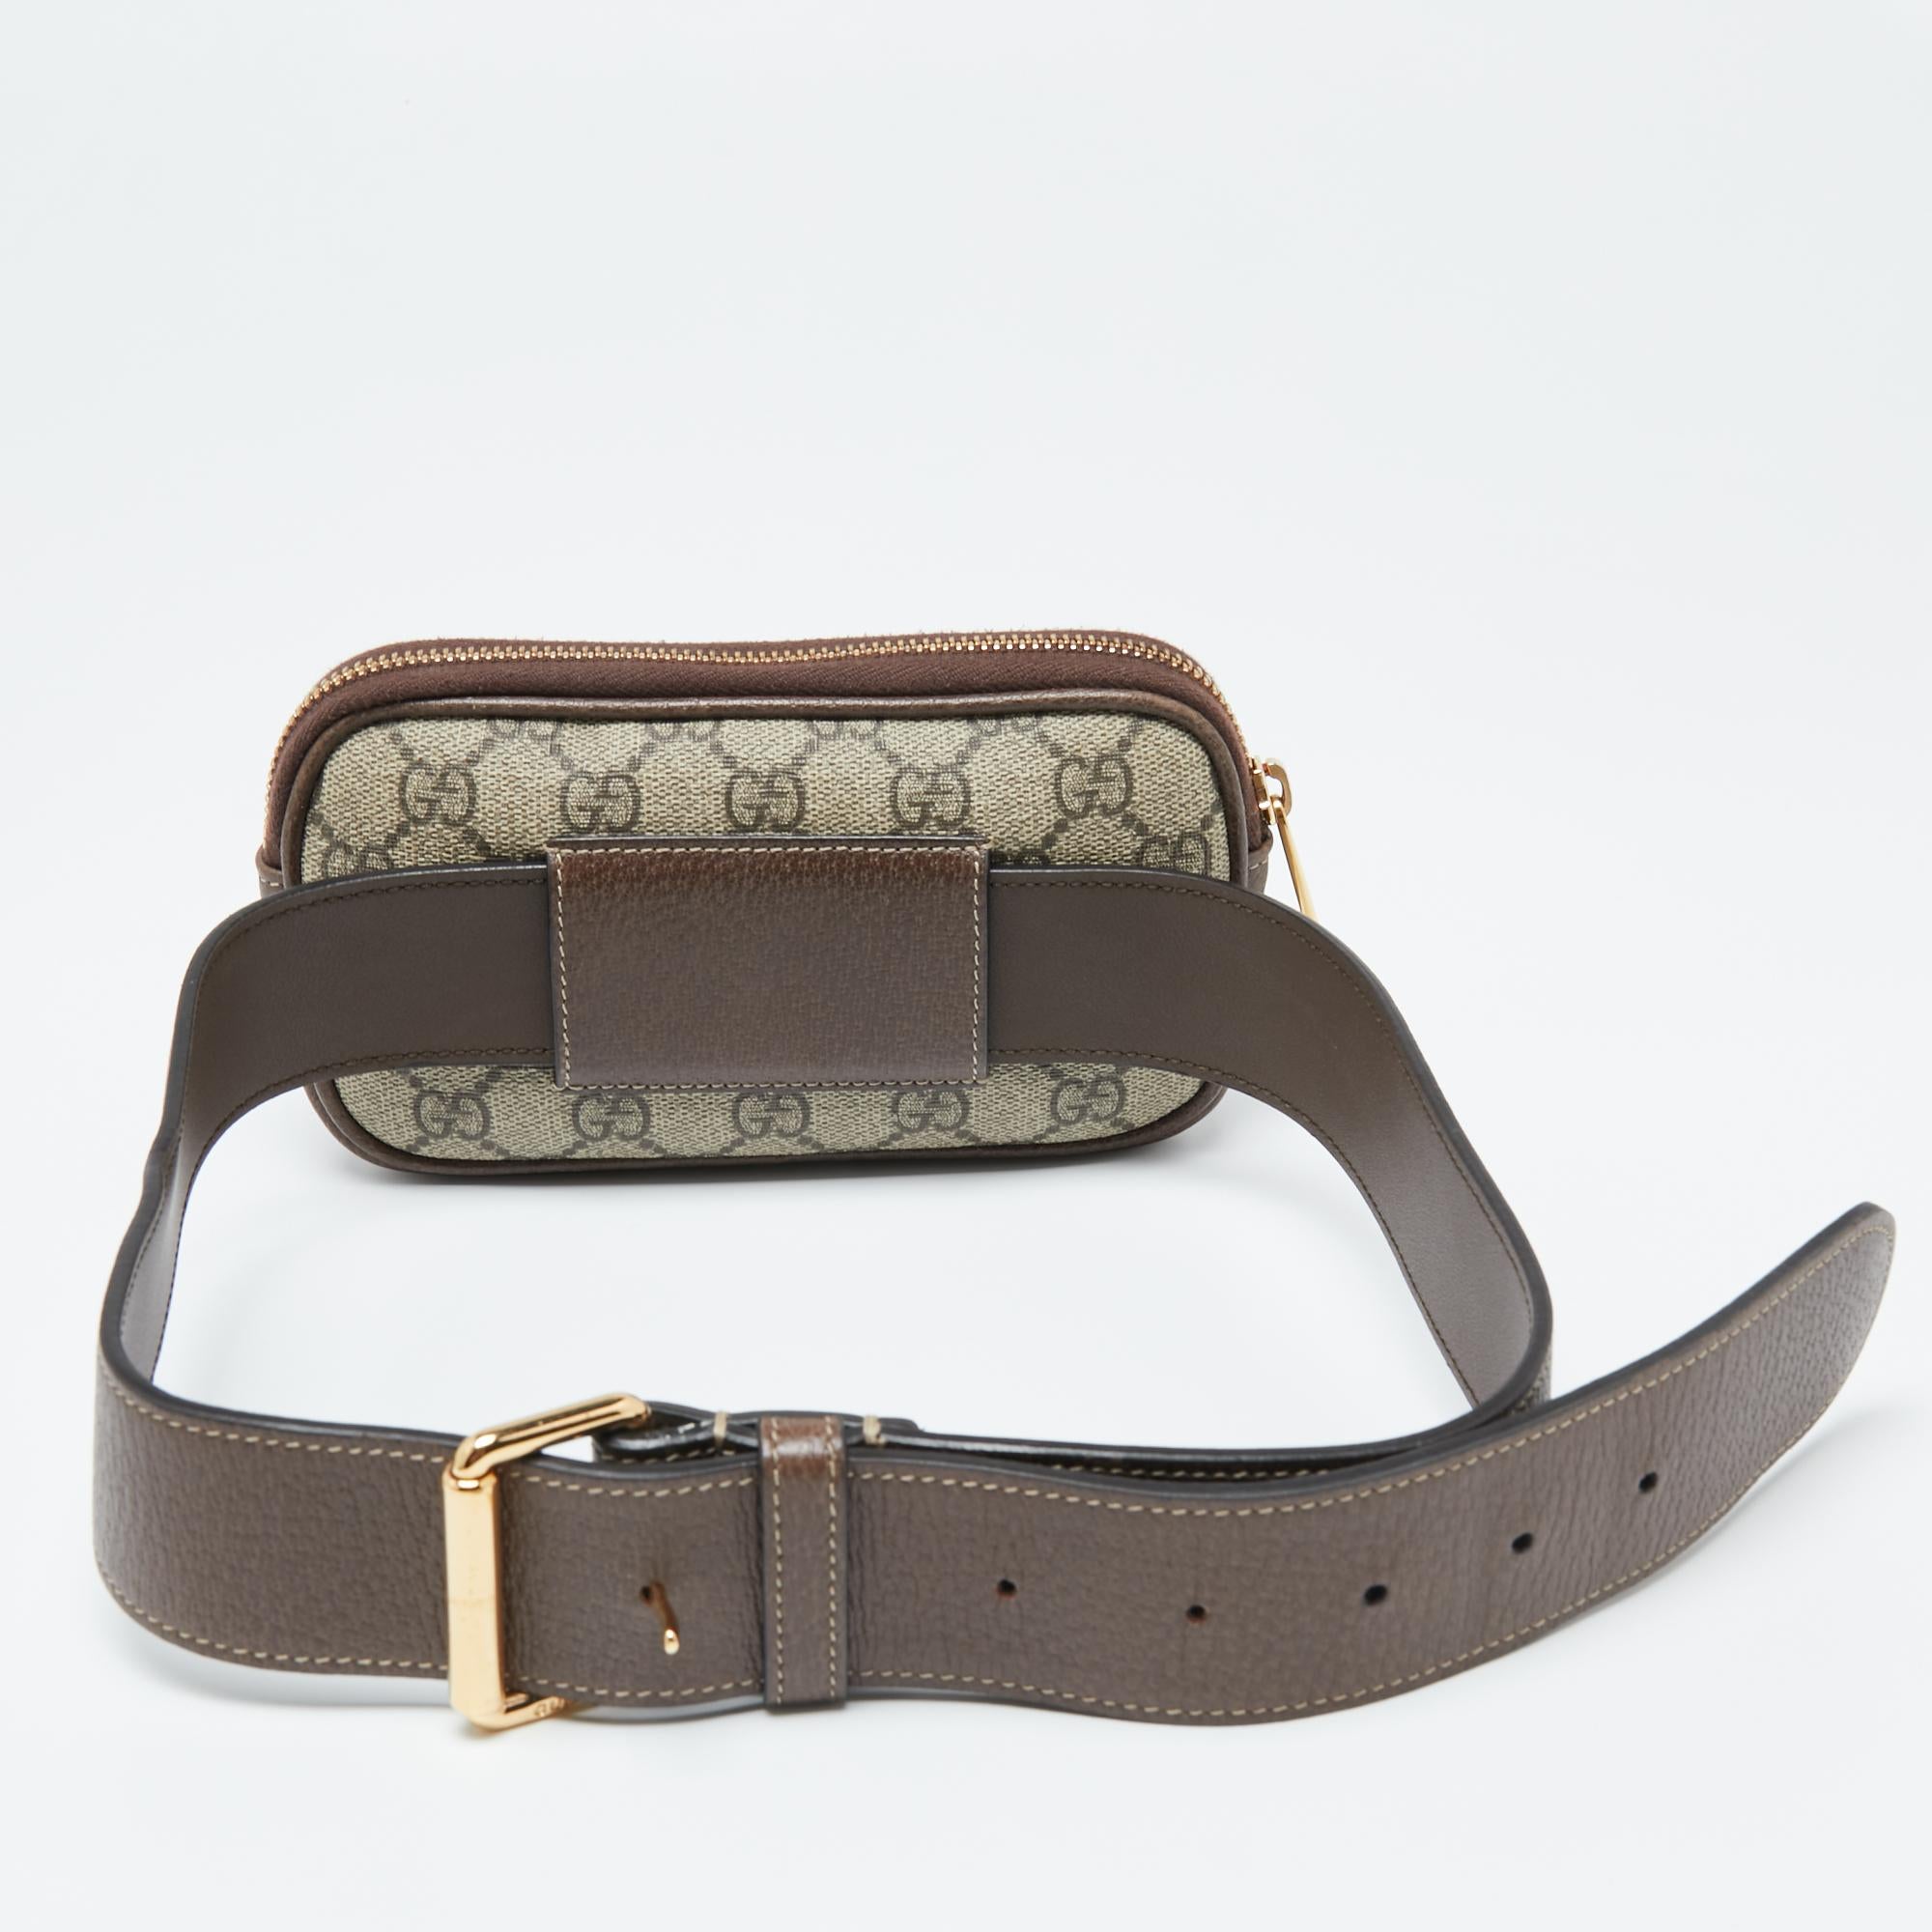 Gucci's Ophidia Belt bag has an appealing design and a functional quality. Constructed using GG Supreme canvas and leather, the bag has the GG logo on the front, a zip-enclosed Alcantara interior, and an adjustable belt.